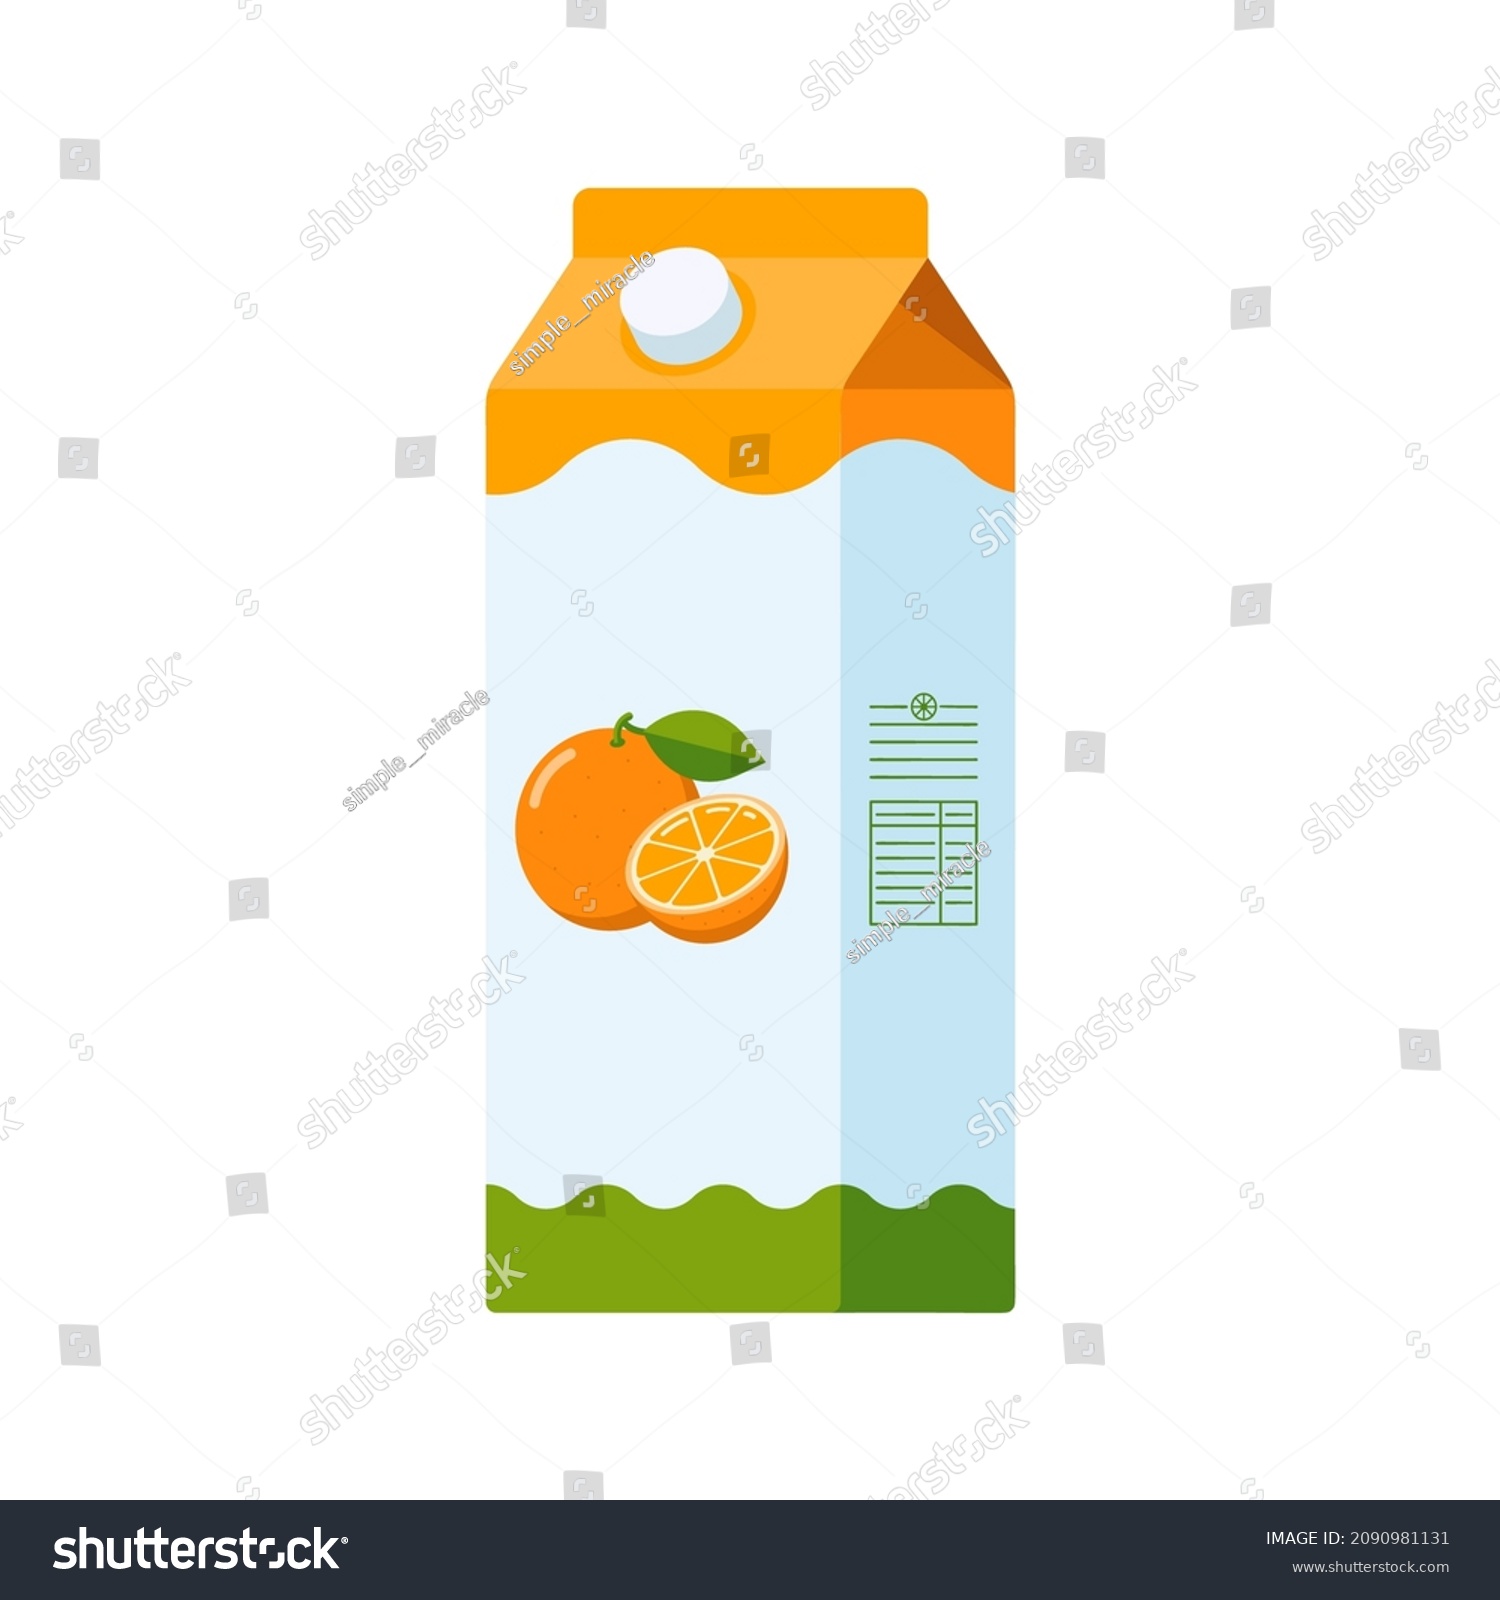 SVG of Carton Box with Orange Juice. Flat Style. Citrus drink icon for logo, menu, emblem, template, stickers, prints, food package design and decoration svg